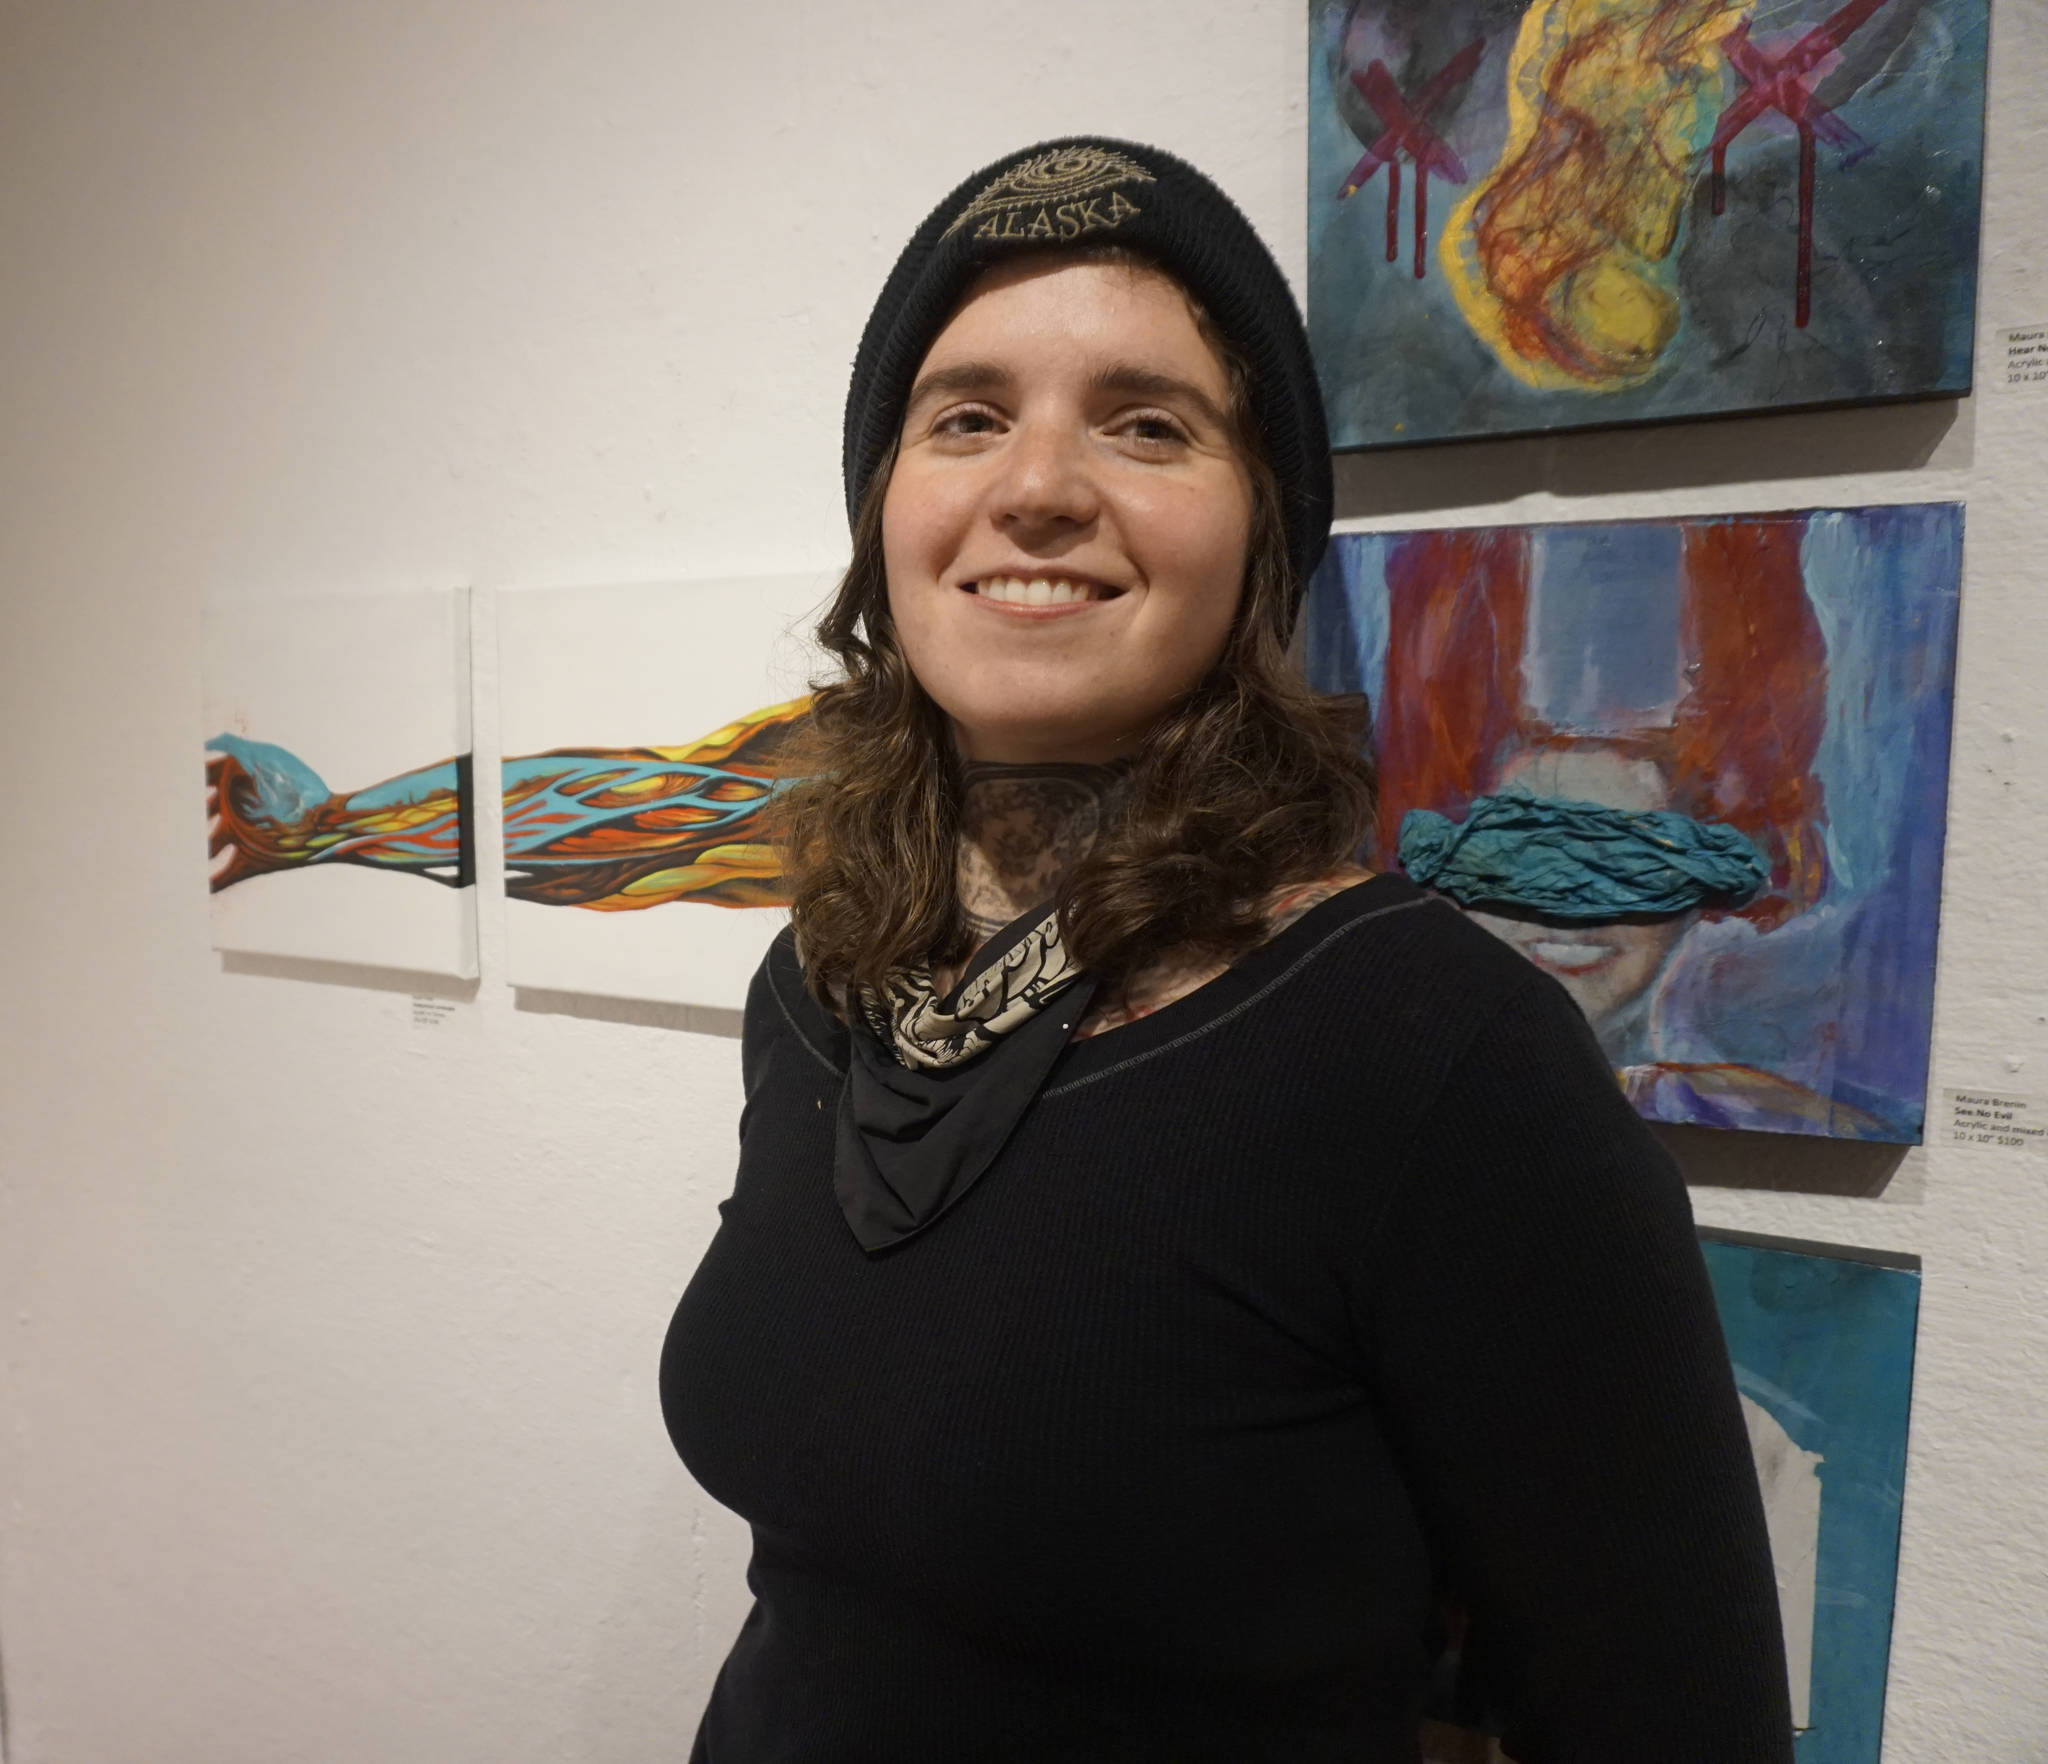 Sarah Frary stands by her paintings, “Anatomical Landscape,” left, at the First Friday, Dec 7, 2018, opening of Bunnell Street Arts Center’s 10x10 show in Homer, Alaska. (Photo by Michael Armstrong/ Homer News)